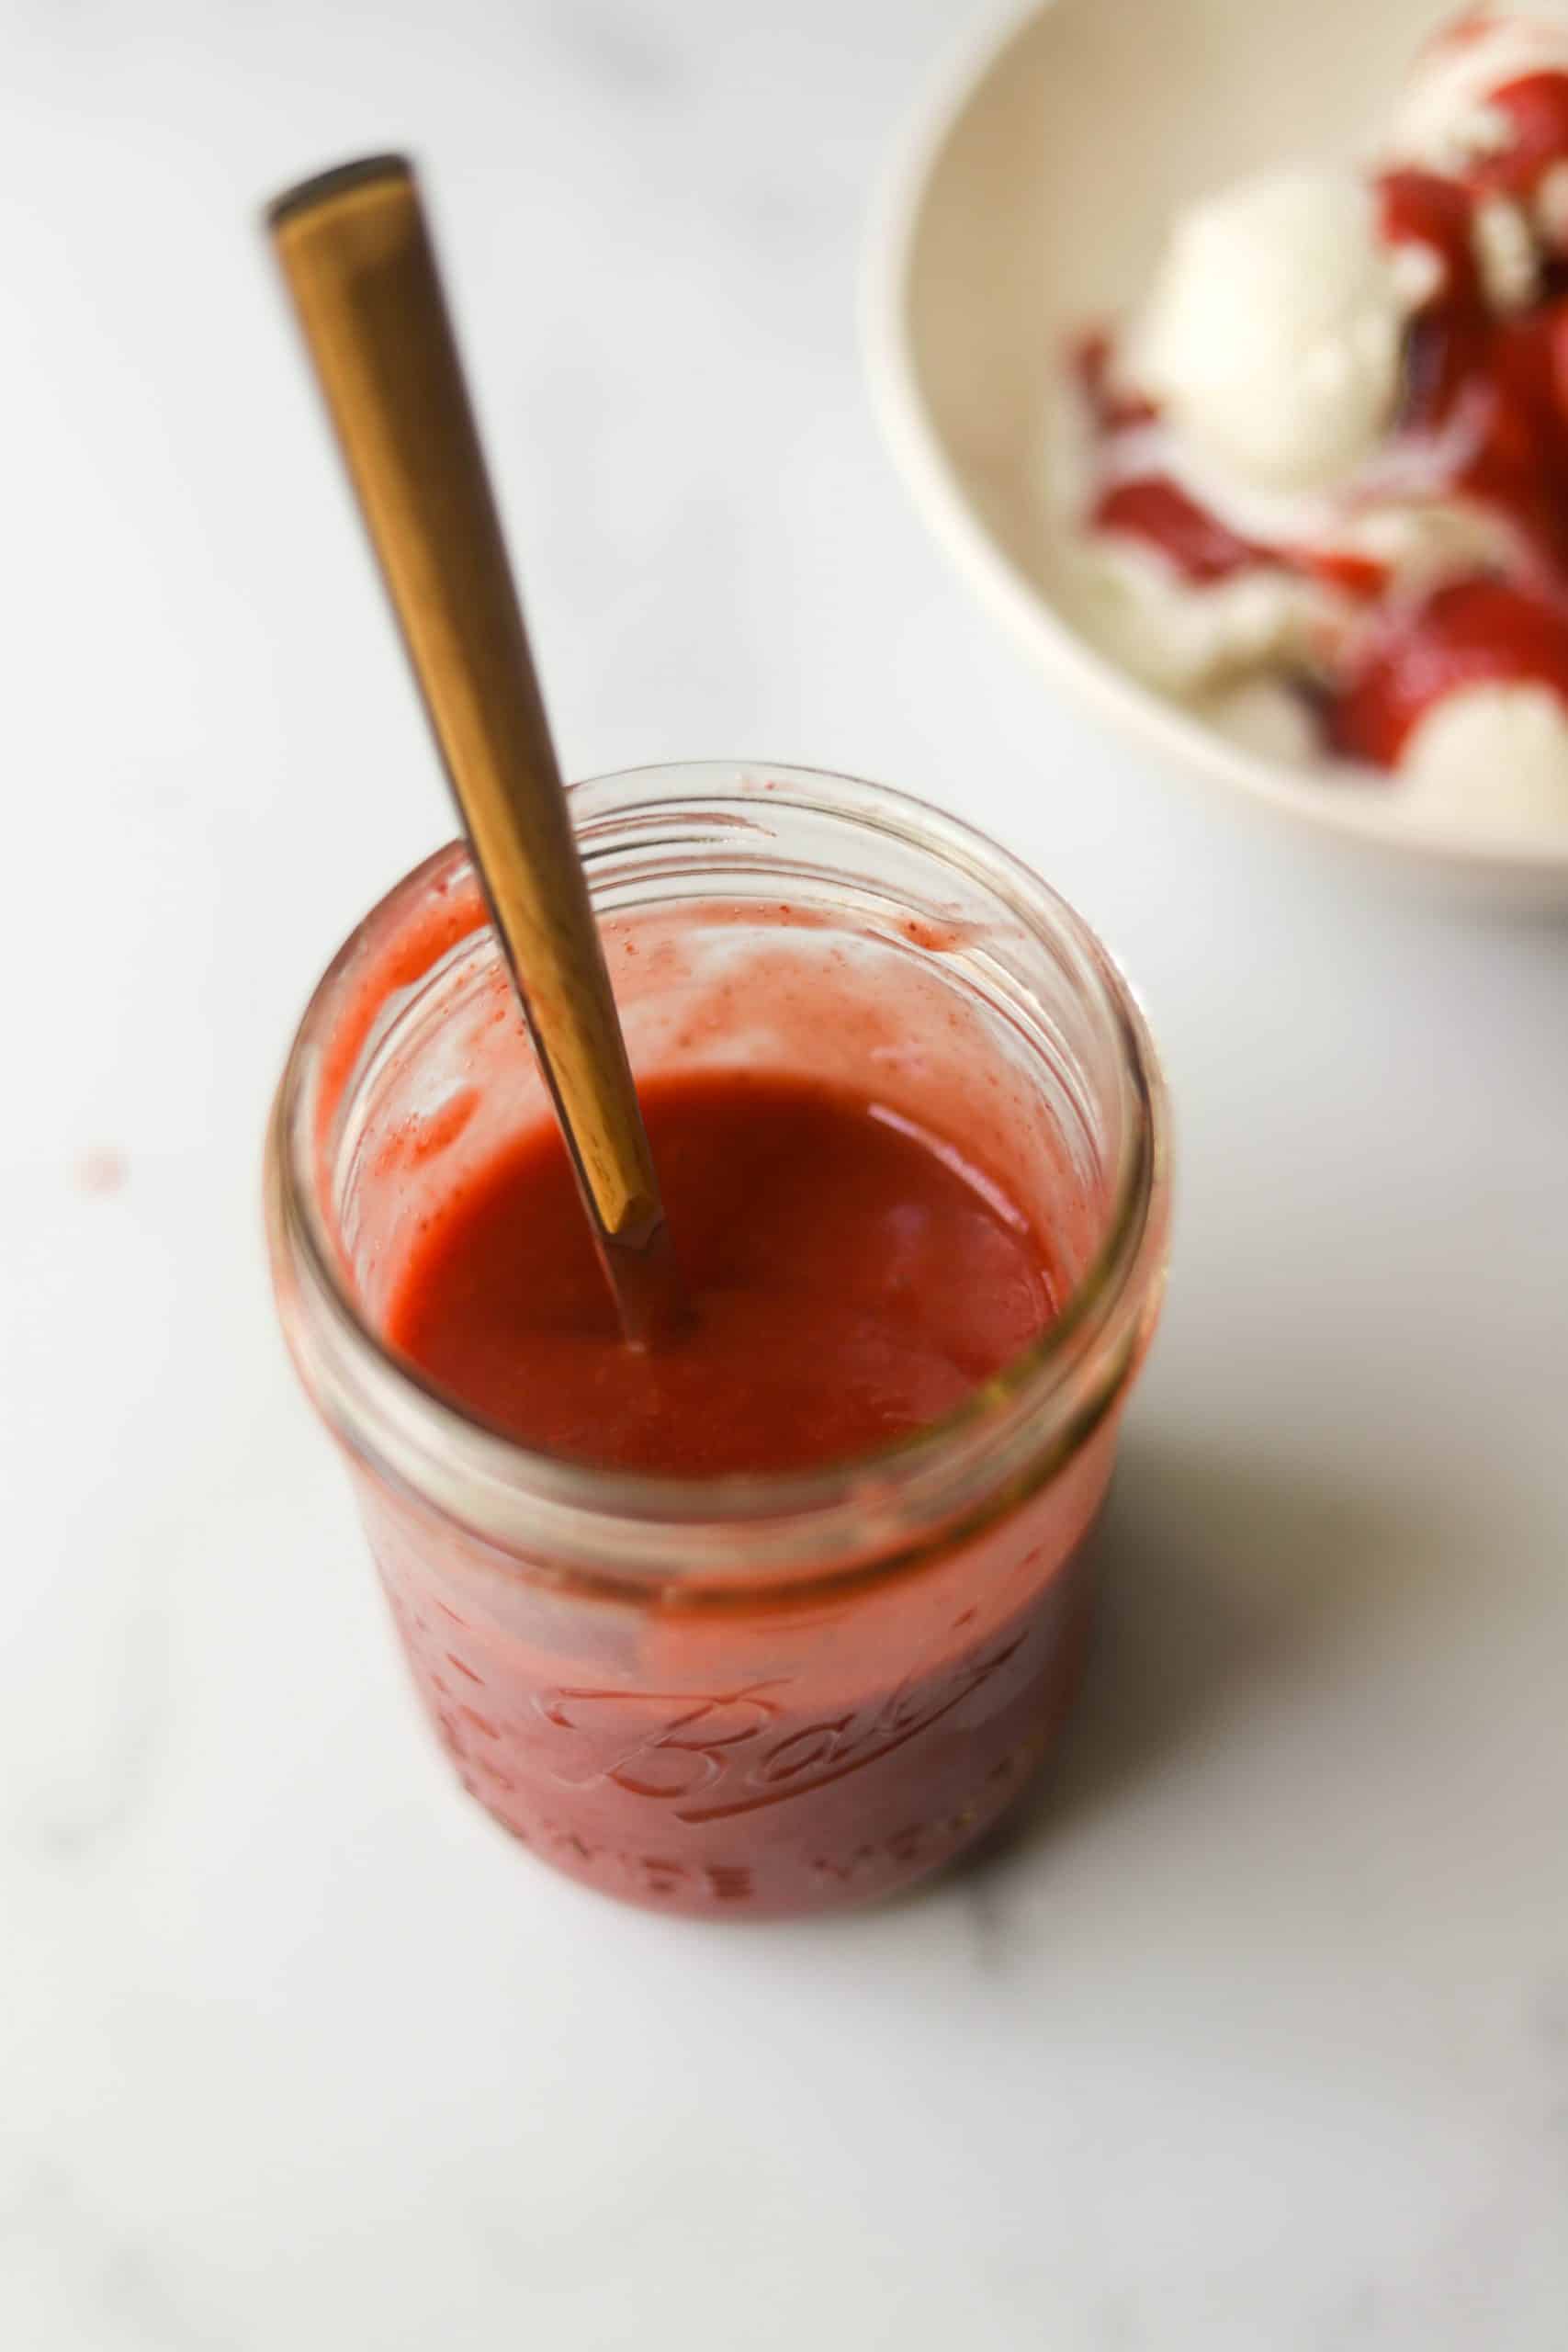 A clear jar filled with strawberry coulis.